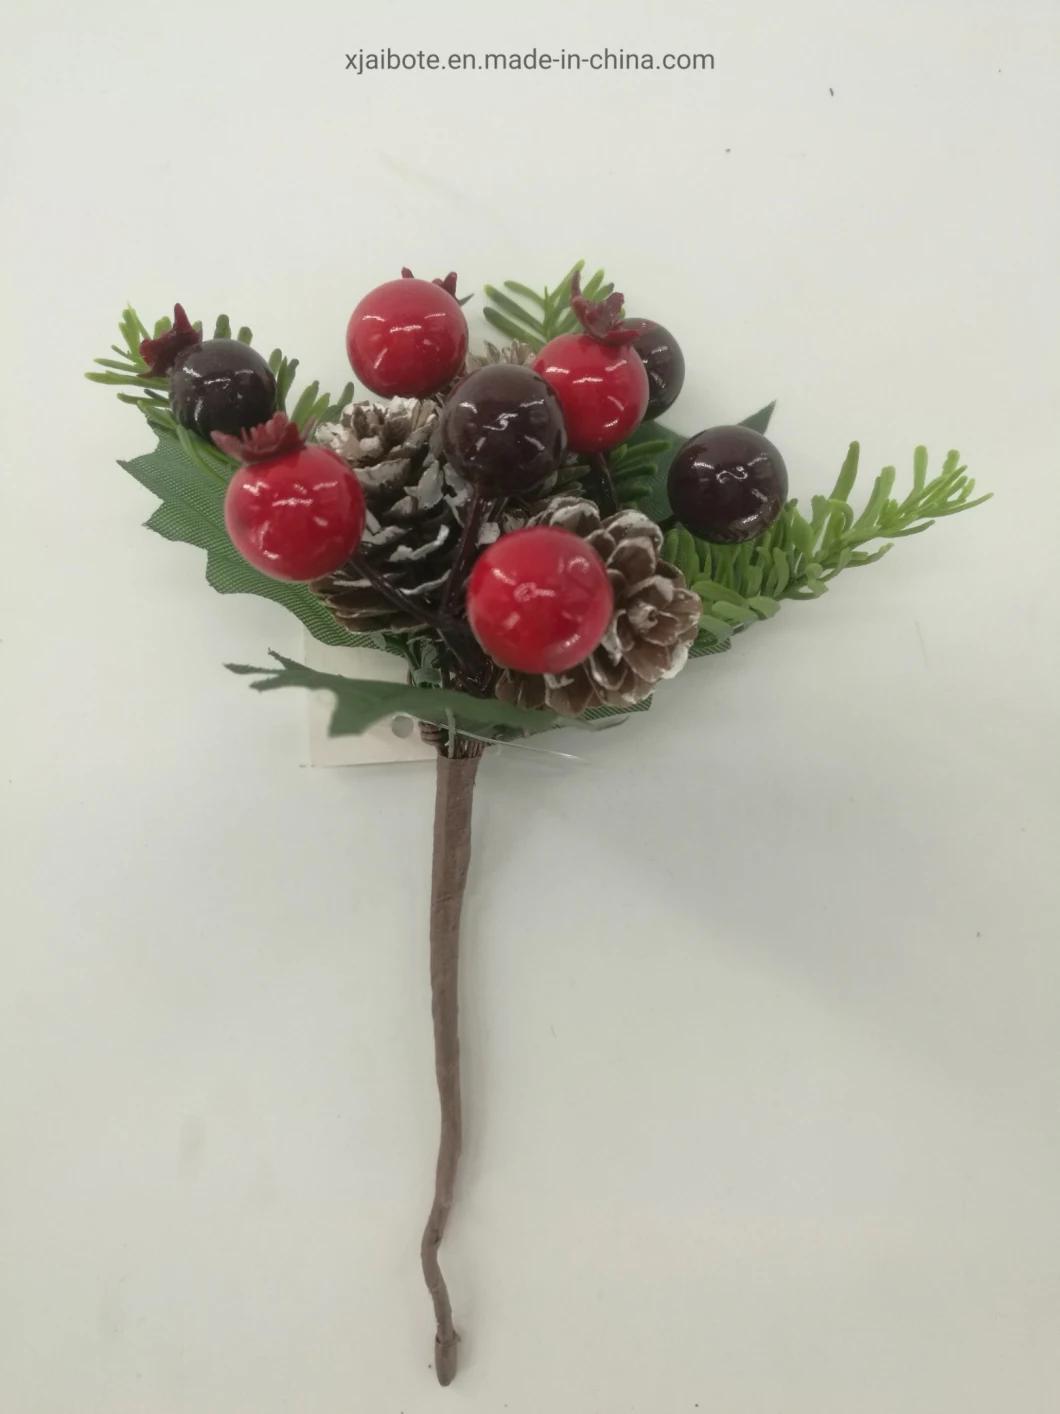 Artificial Christmas Pick Tree Decoration Made in China